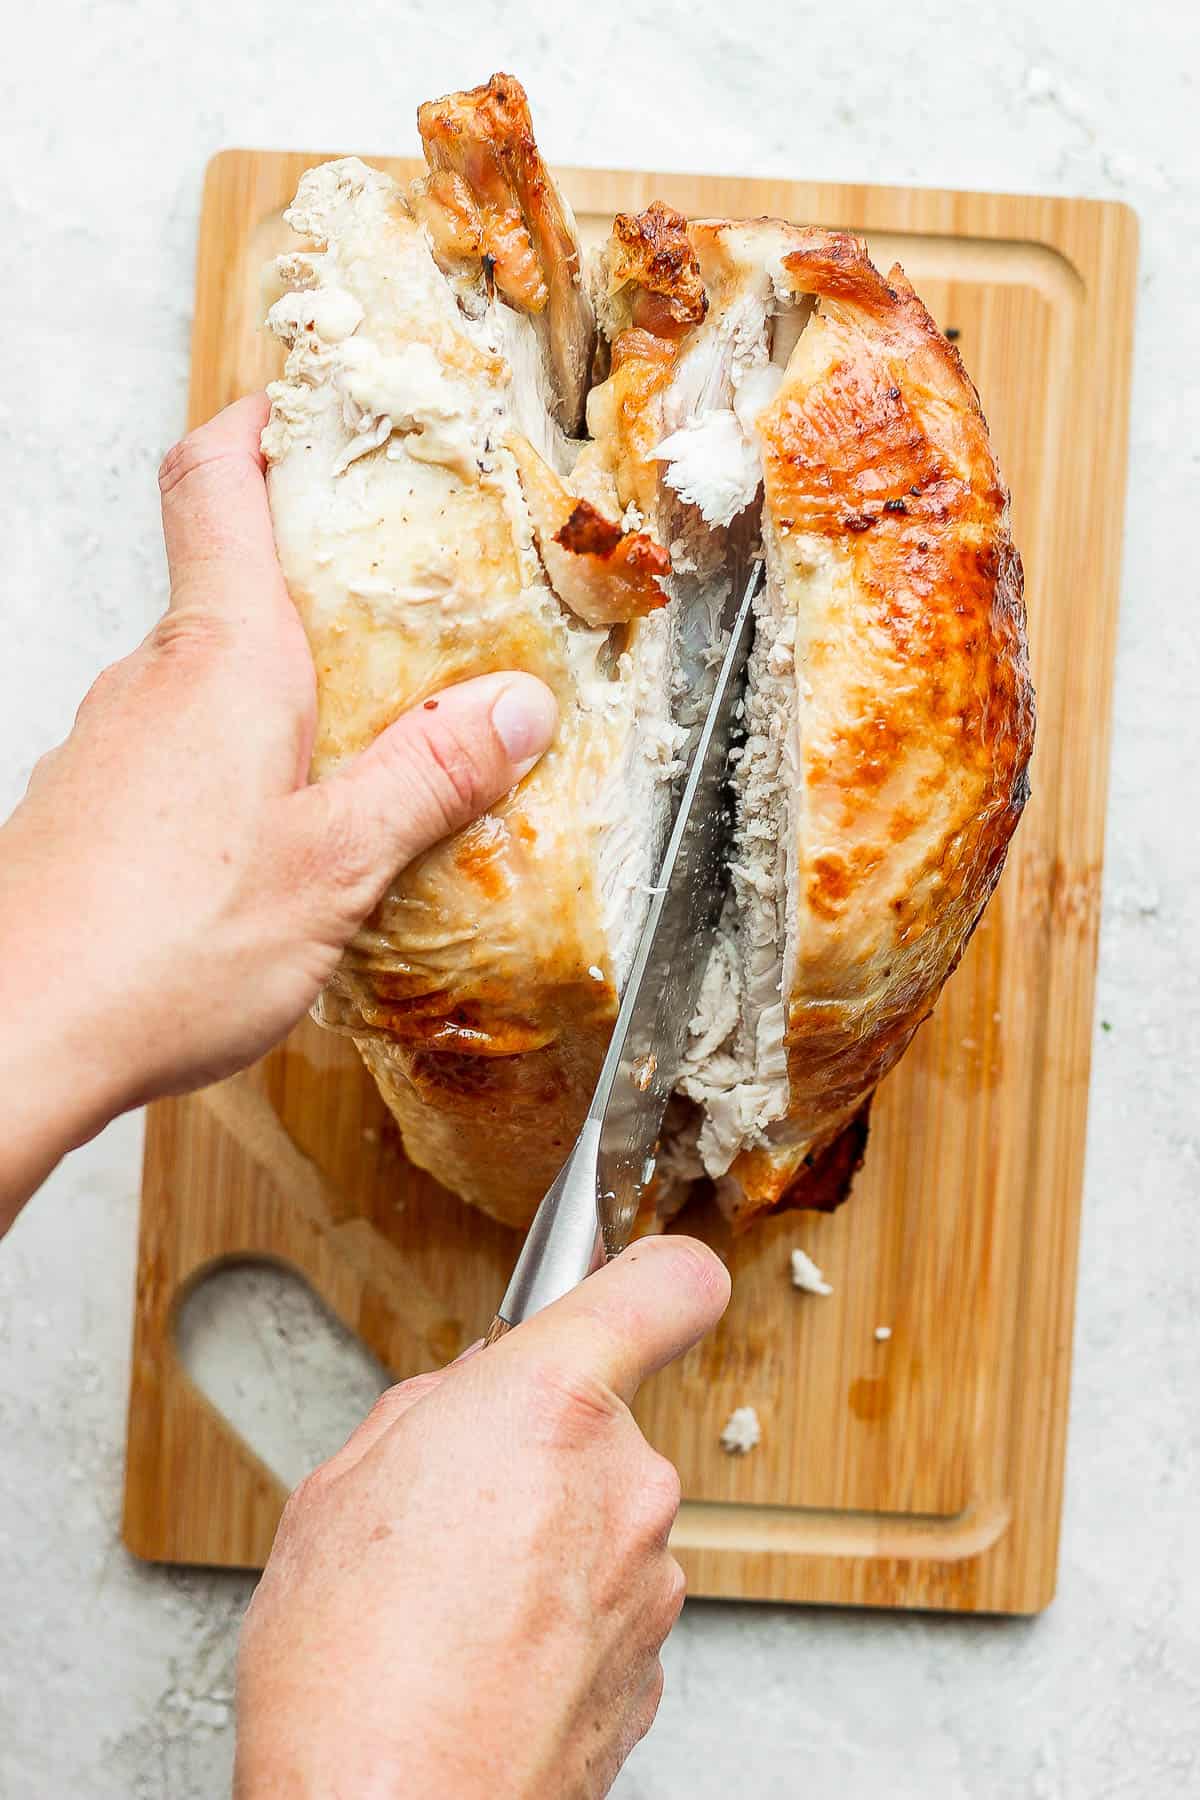 A knife slicing down the breastbone to remove the turkey breast from one side.